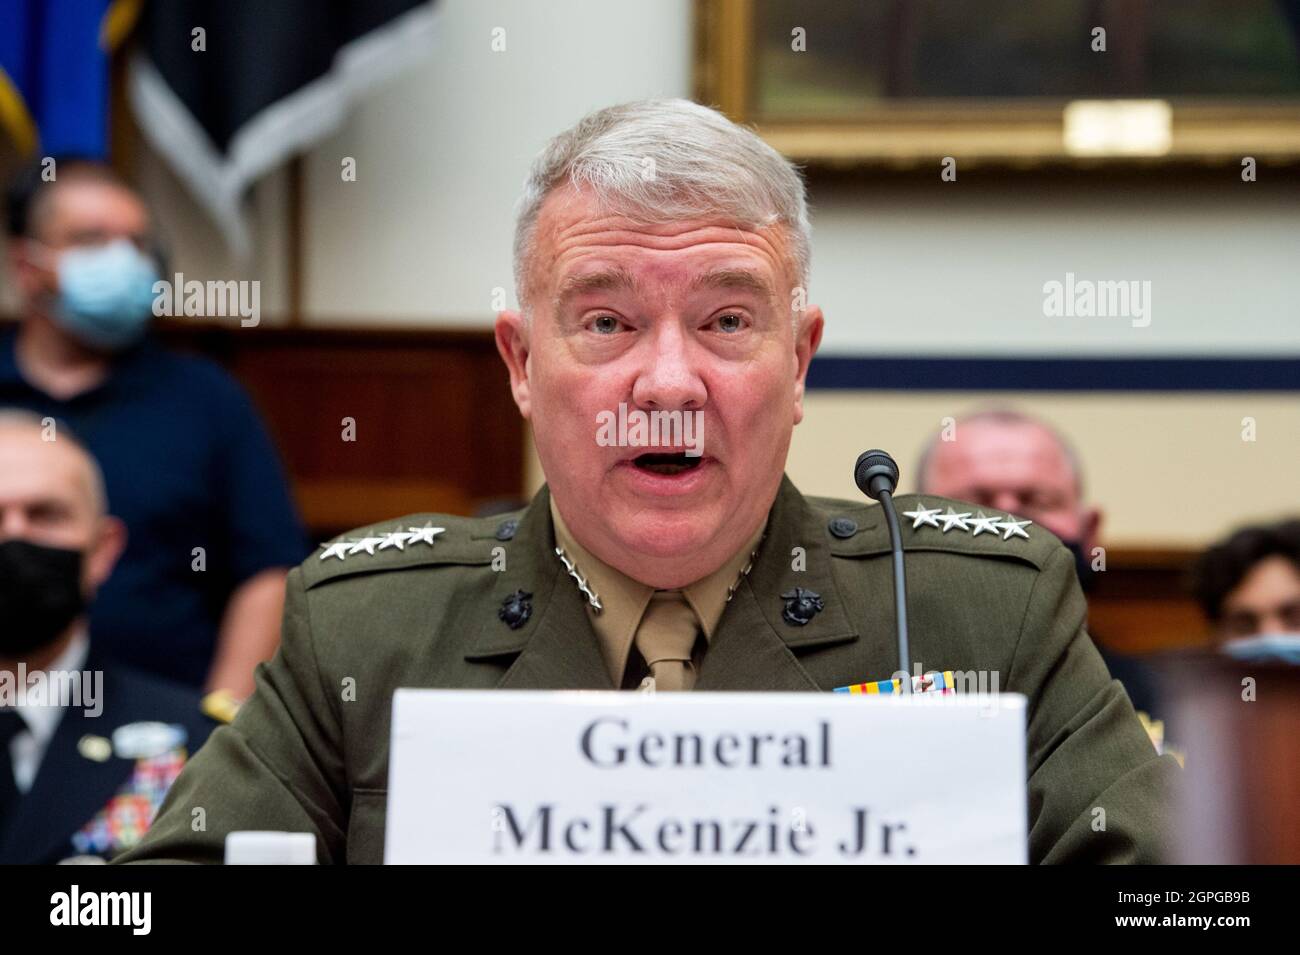 General Kenneth McKenzie Jr., USMC Commander, U.S. Central Command responds to questions during a House Armed Services Committee hearing on “Ending the U.S. Military Mission in Afghanistan” in the Rayburn House Office Building in Washington, DC, Wednesday, September 29, 2021. Credit: Rod Lamkey / Pool via CNP /MediaPunch Stock Photo